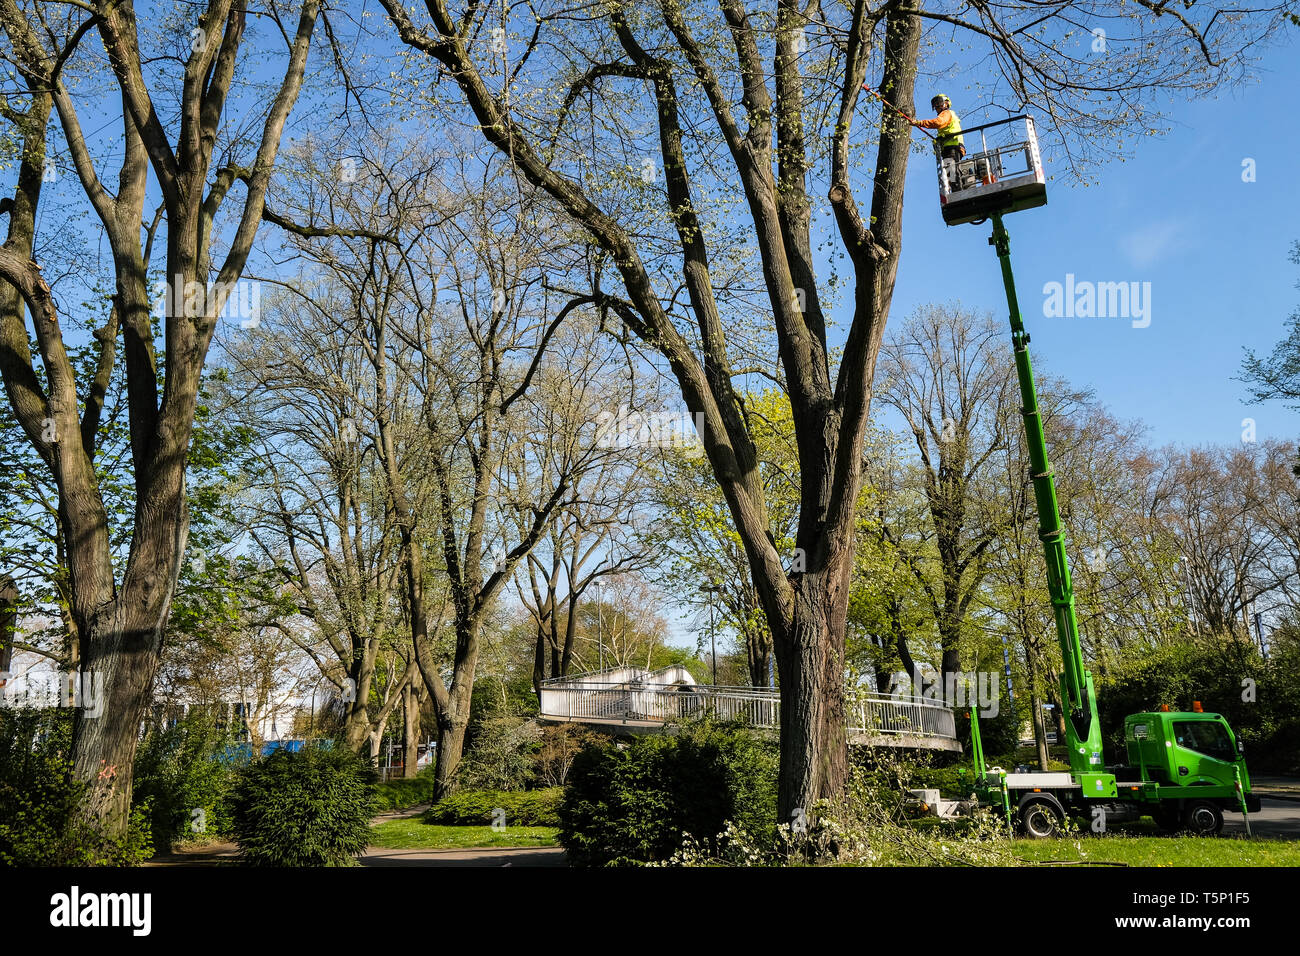 Worker on a lift truck, tree trimming on trees along the federal road no. 1 in the urban area of Dortmund, Germany Stock Photo